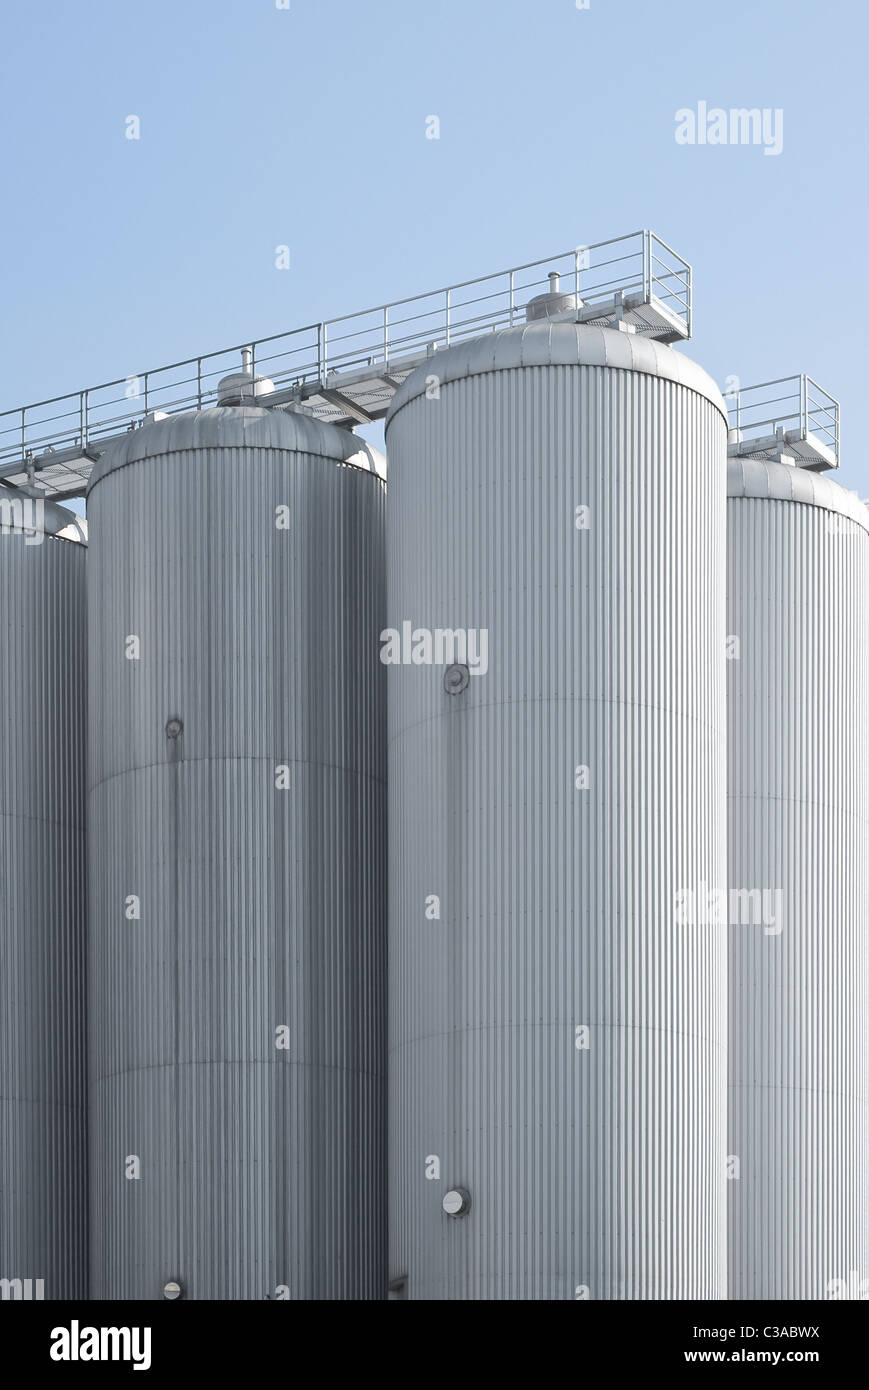 Industrial Agriculture Silo Housing Grain with Copy Space Stock Photo